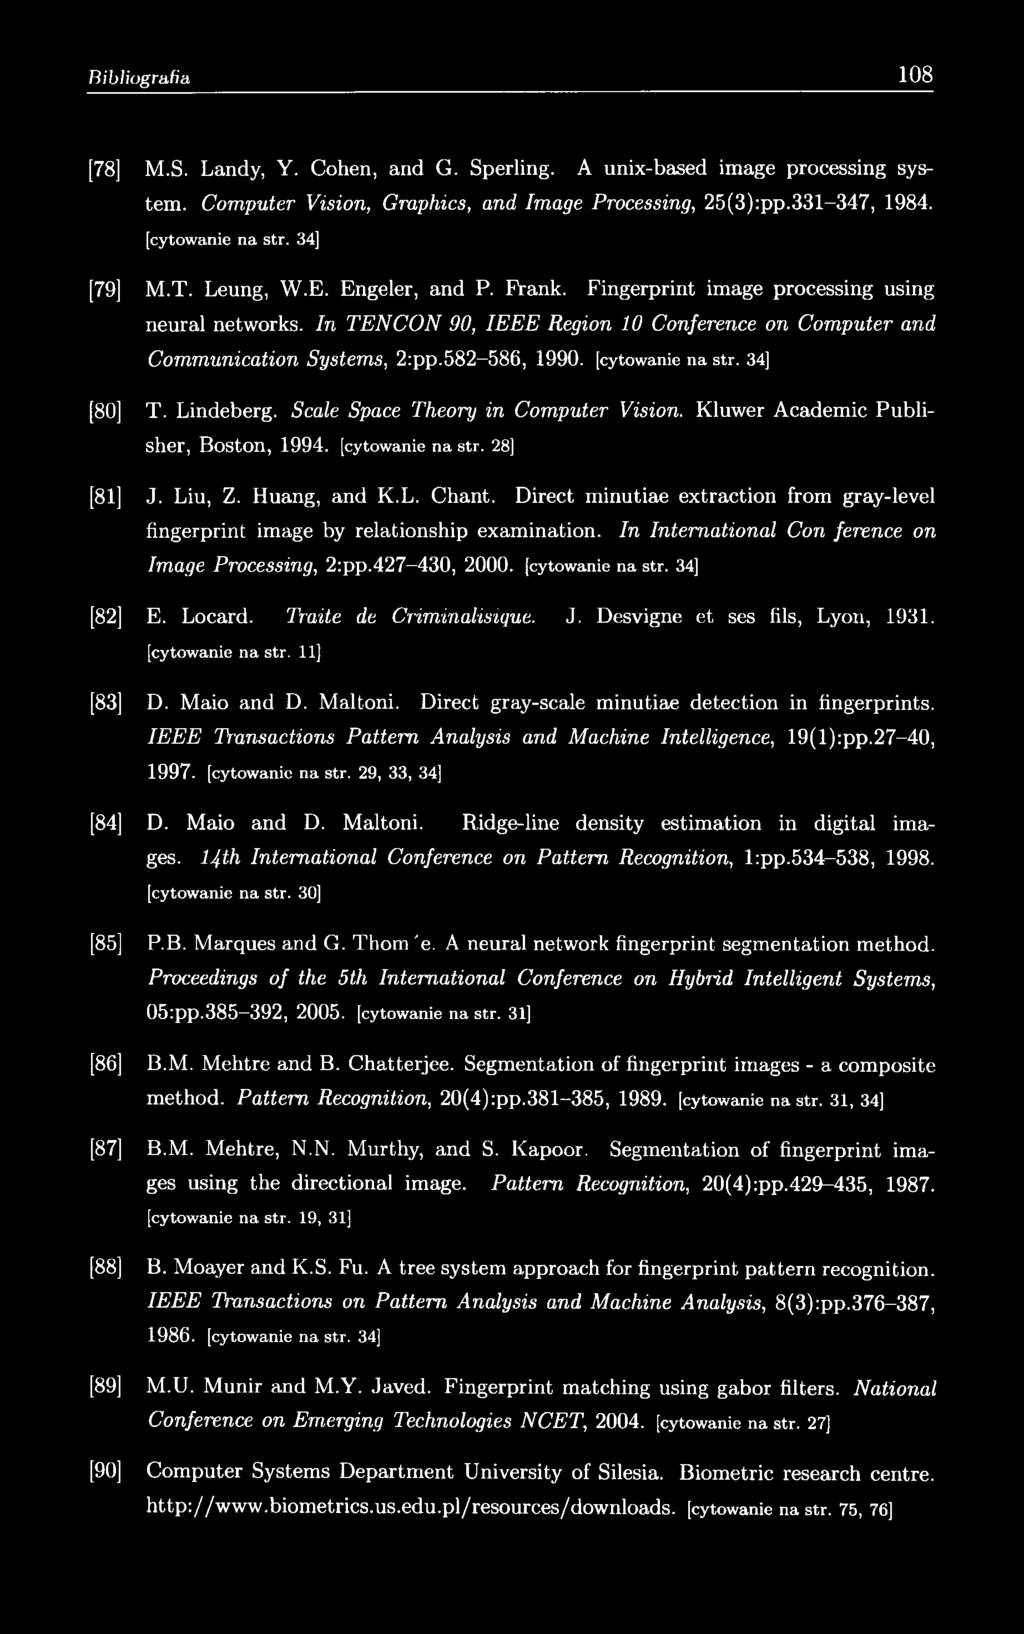 34] [80] T. Lindeberg. Scalę Space Theory in Computer Vision. Kluwer Academic Publisher, Boston, 1994. [cytowanie na str. 28] [81] J. Liu, Z. Huang, and K.L. Chant.